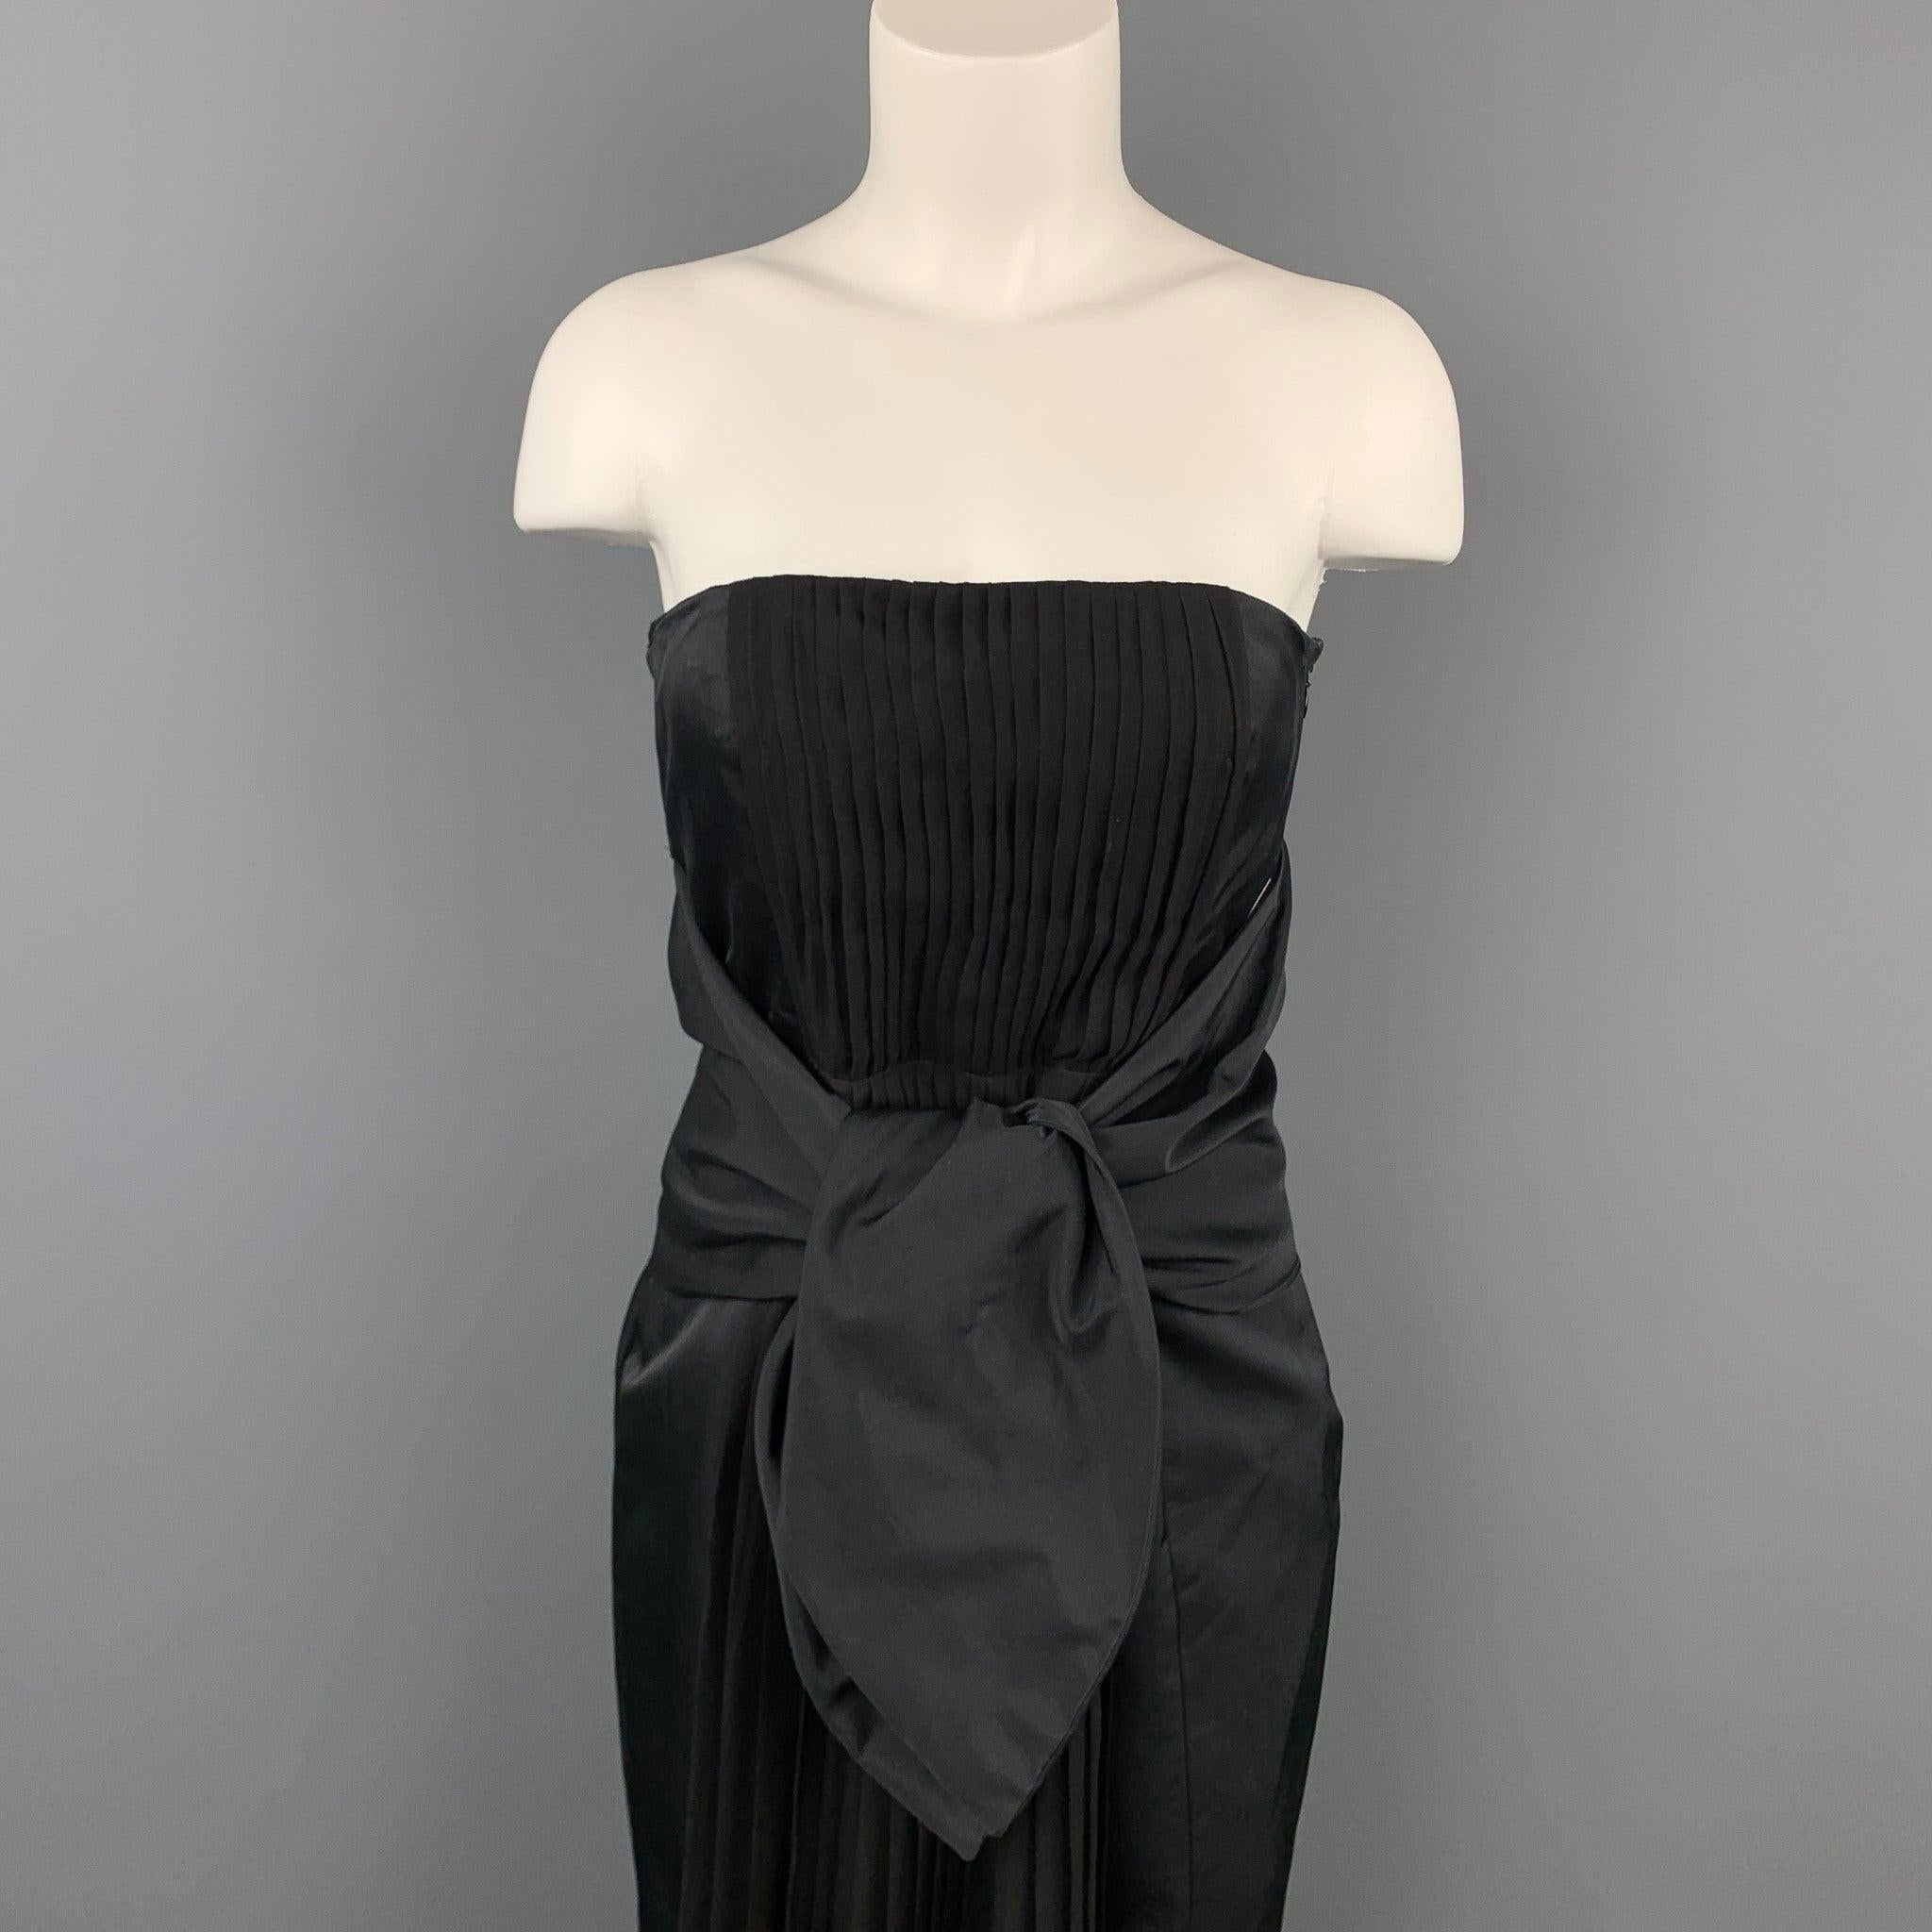 GIAMBATTISTA VALLI strapless dress comes in a black pleated cotton / silk featuring a cocktail style, inner bustier, wide waist tie detail, and a side zip up closure. Made in Italy.Very Good
Pre-Owned Condition. 

Marked:  42 / S 

Measurements: 
